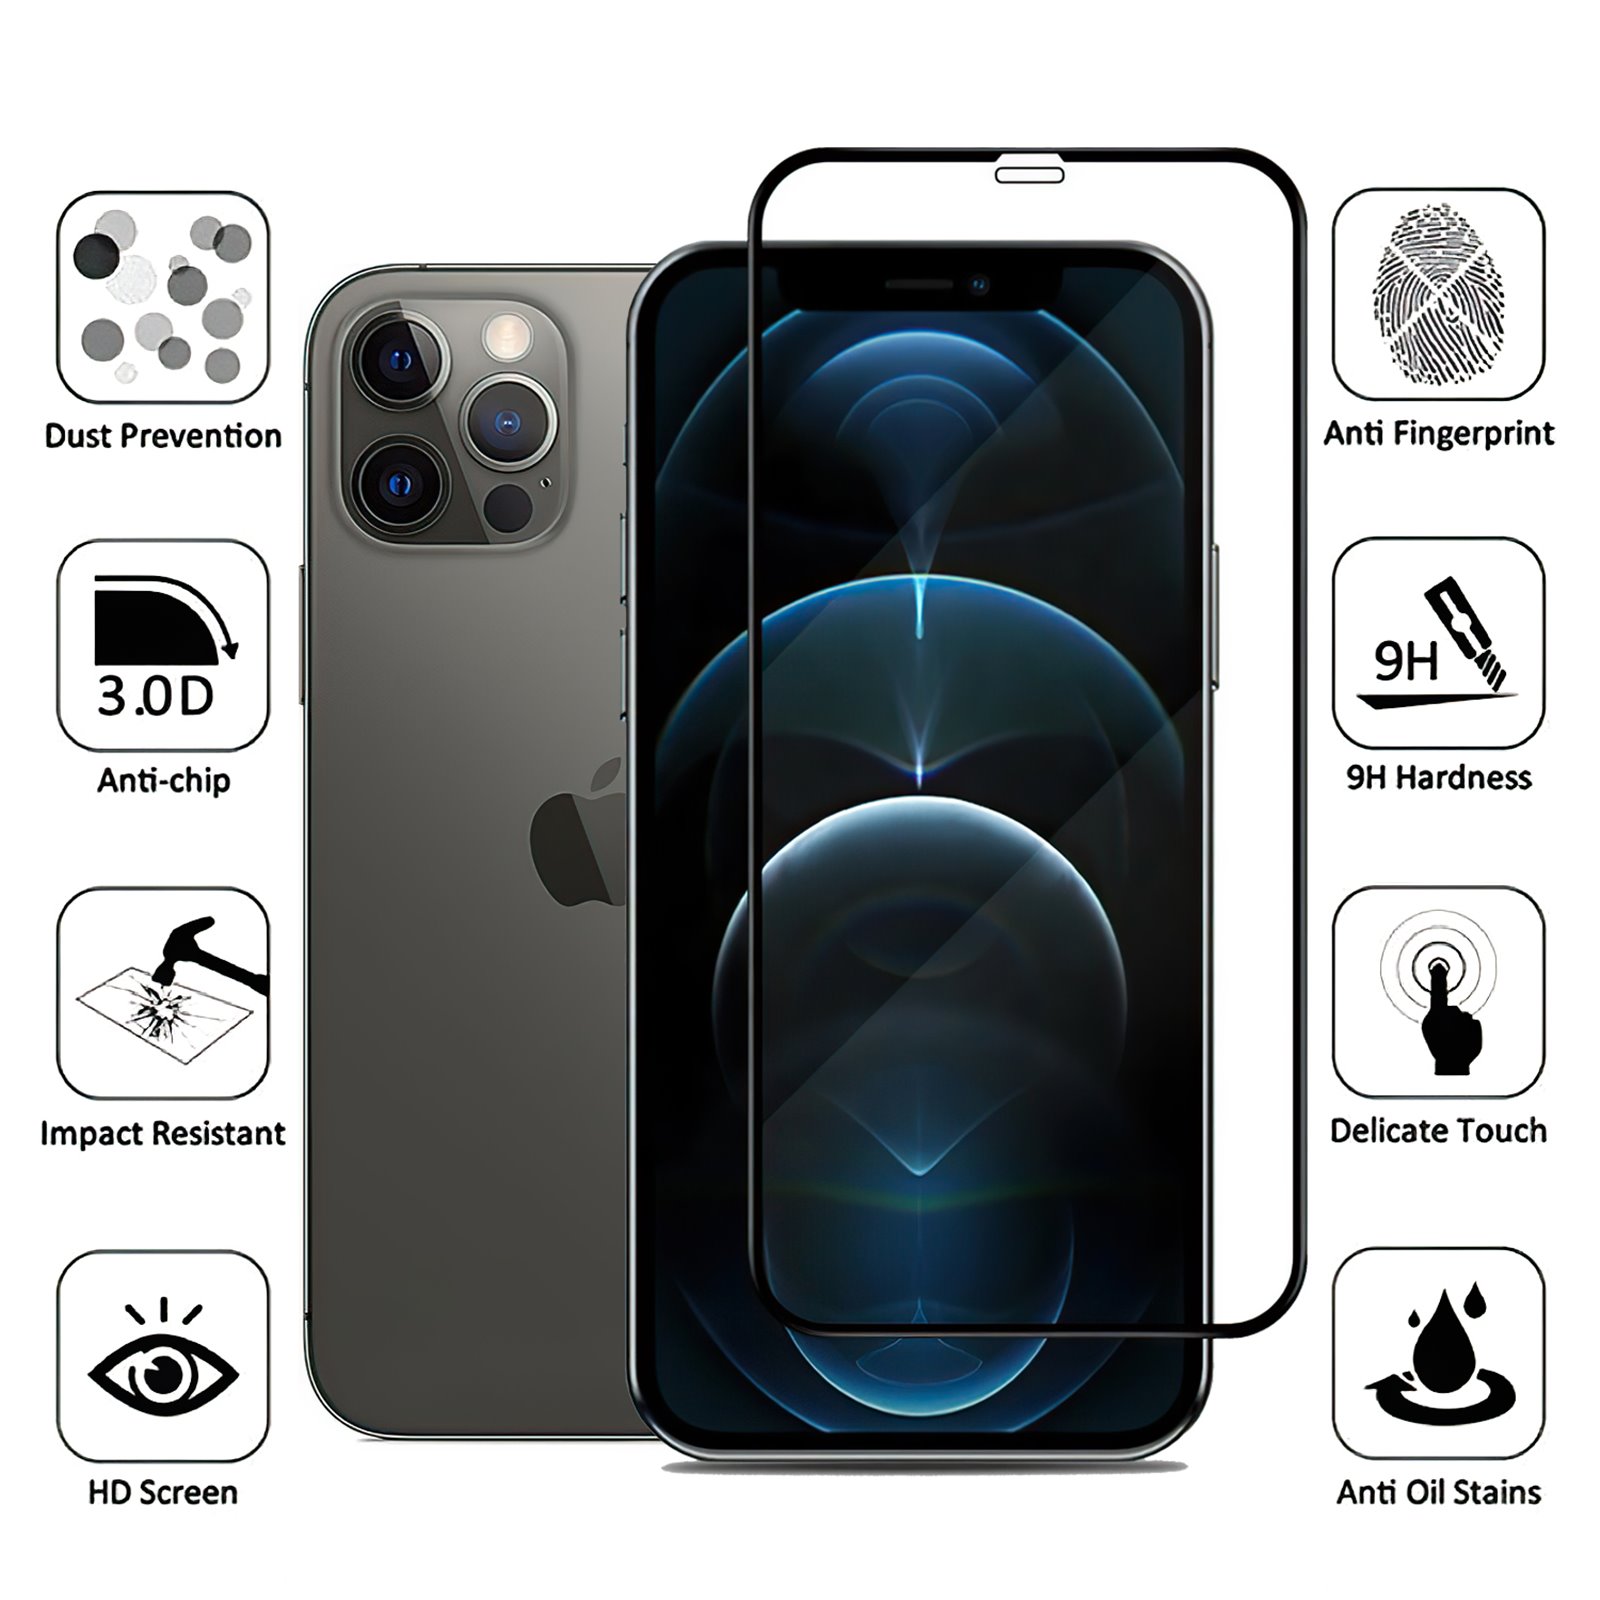 iPhone 12 Pro Max - Tempered Glass Screen Protector Protection